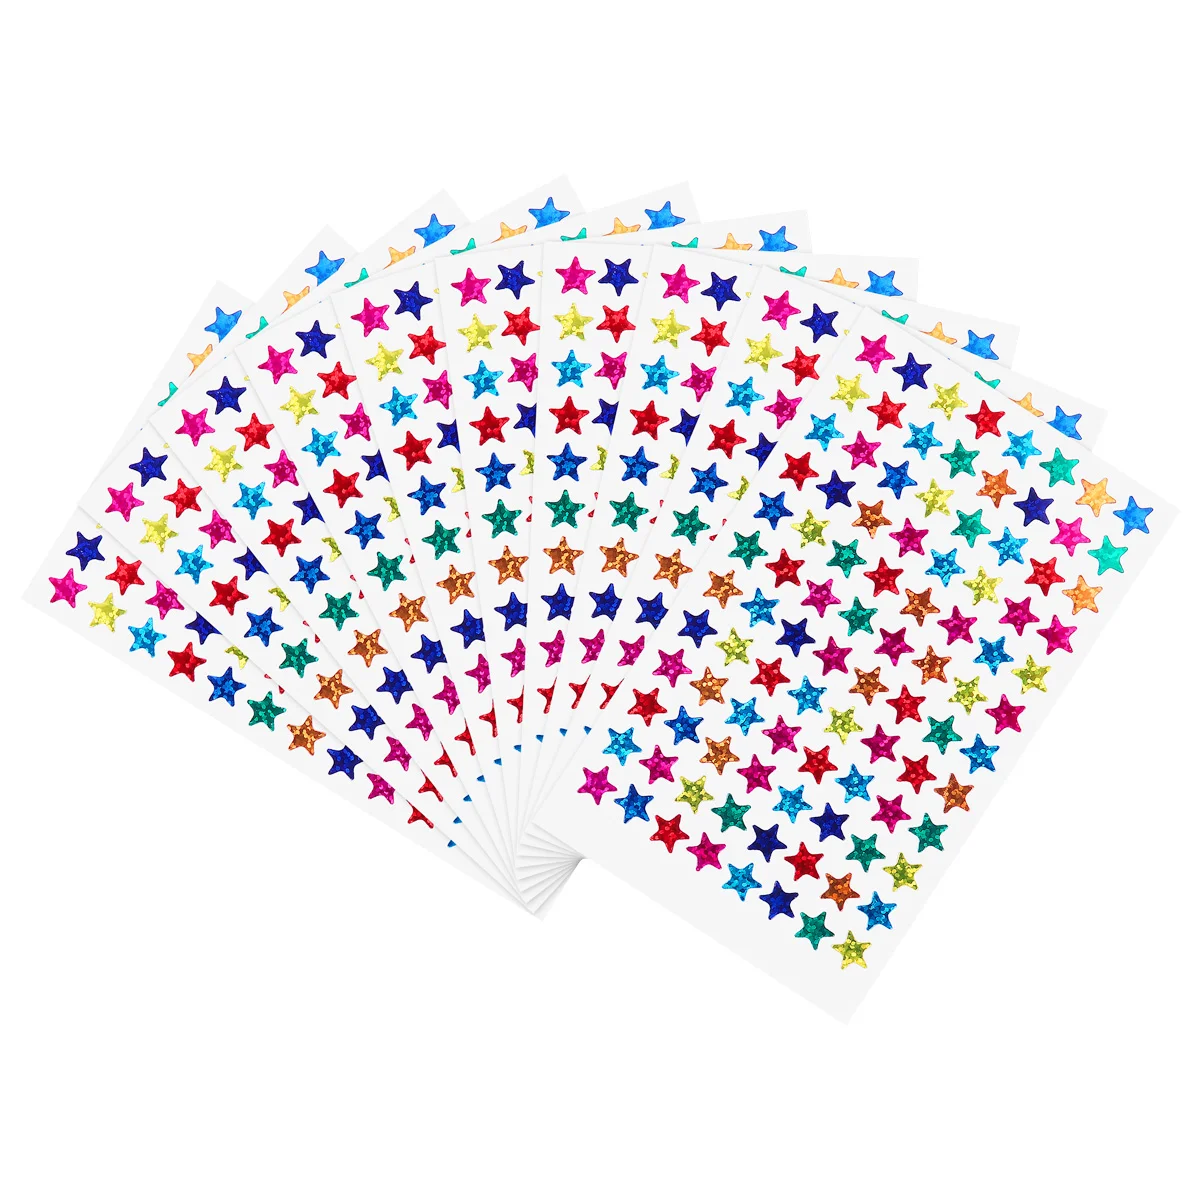 

960 Colorful Star Stickers, Self- Adhesive Stickers Stars Labels, Assorted Colors Reward Star Stickers